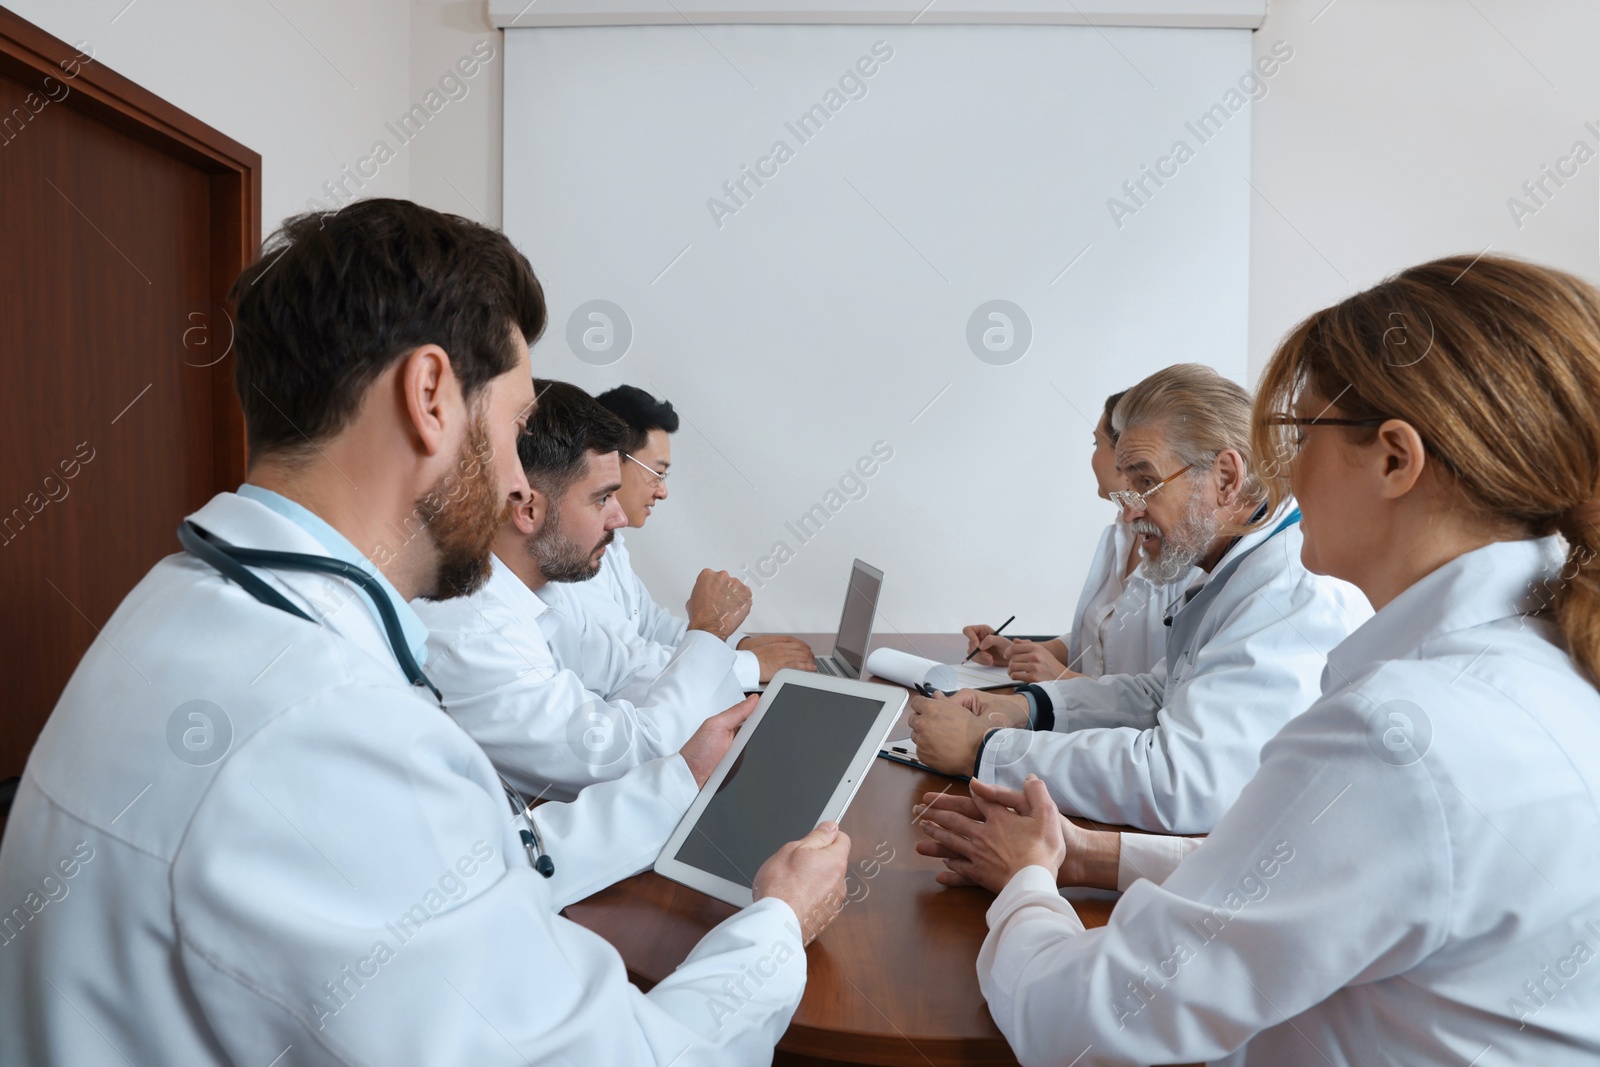 Photo of Team of doctors having discussion during medical conference in meeting room